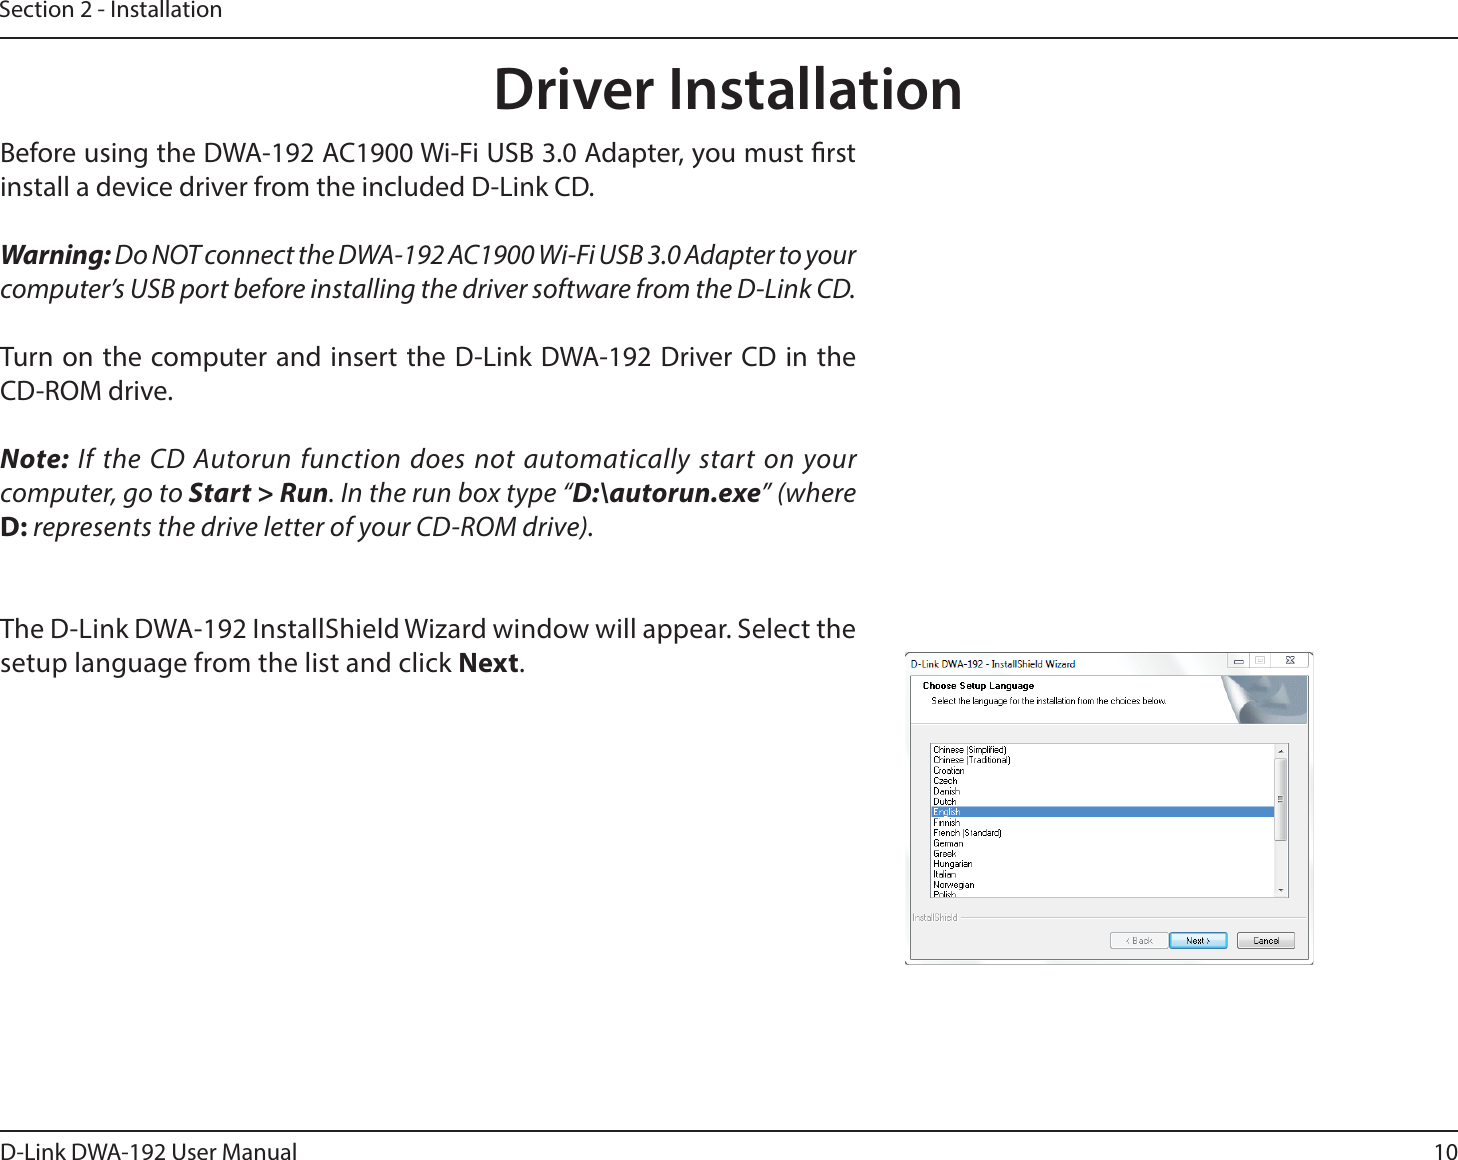 10D-Link DWA-192 User ManualSection 2 - InstallationDriver InstallationBefore using the DWA-192 AC1900 Wi-Fi USB 3.0 Adapter, you must rst install a device driver from the included D-Link CD.Warning: Do NOT connect the DWA-192 AC1900 Wi-Fi USB 3.0 Adapter to your computer’s USB port before installing the driver software from the D-Link CD.Turn on the computer and insert the D-Link DWA-192 Driver CD in the CD-ROM drive.Note: If the CD Autorun function does not automatically start on your computer, go to Start &gt; Run. In the run box type “D:\autorun.exe” (where D: represents the drive letter of your CD-ROM drive).The D-Link DWA-192 InstallShield Wizard window will appear. Select the setup language from the list and click Next.